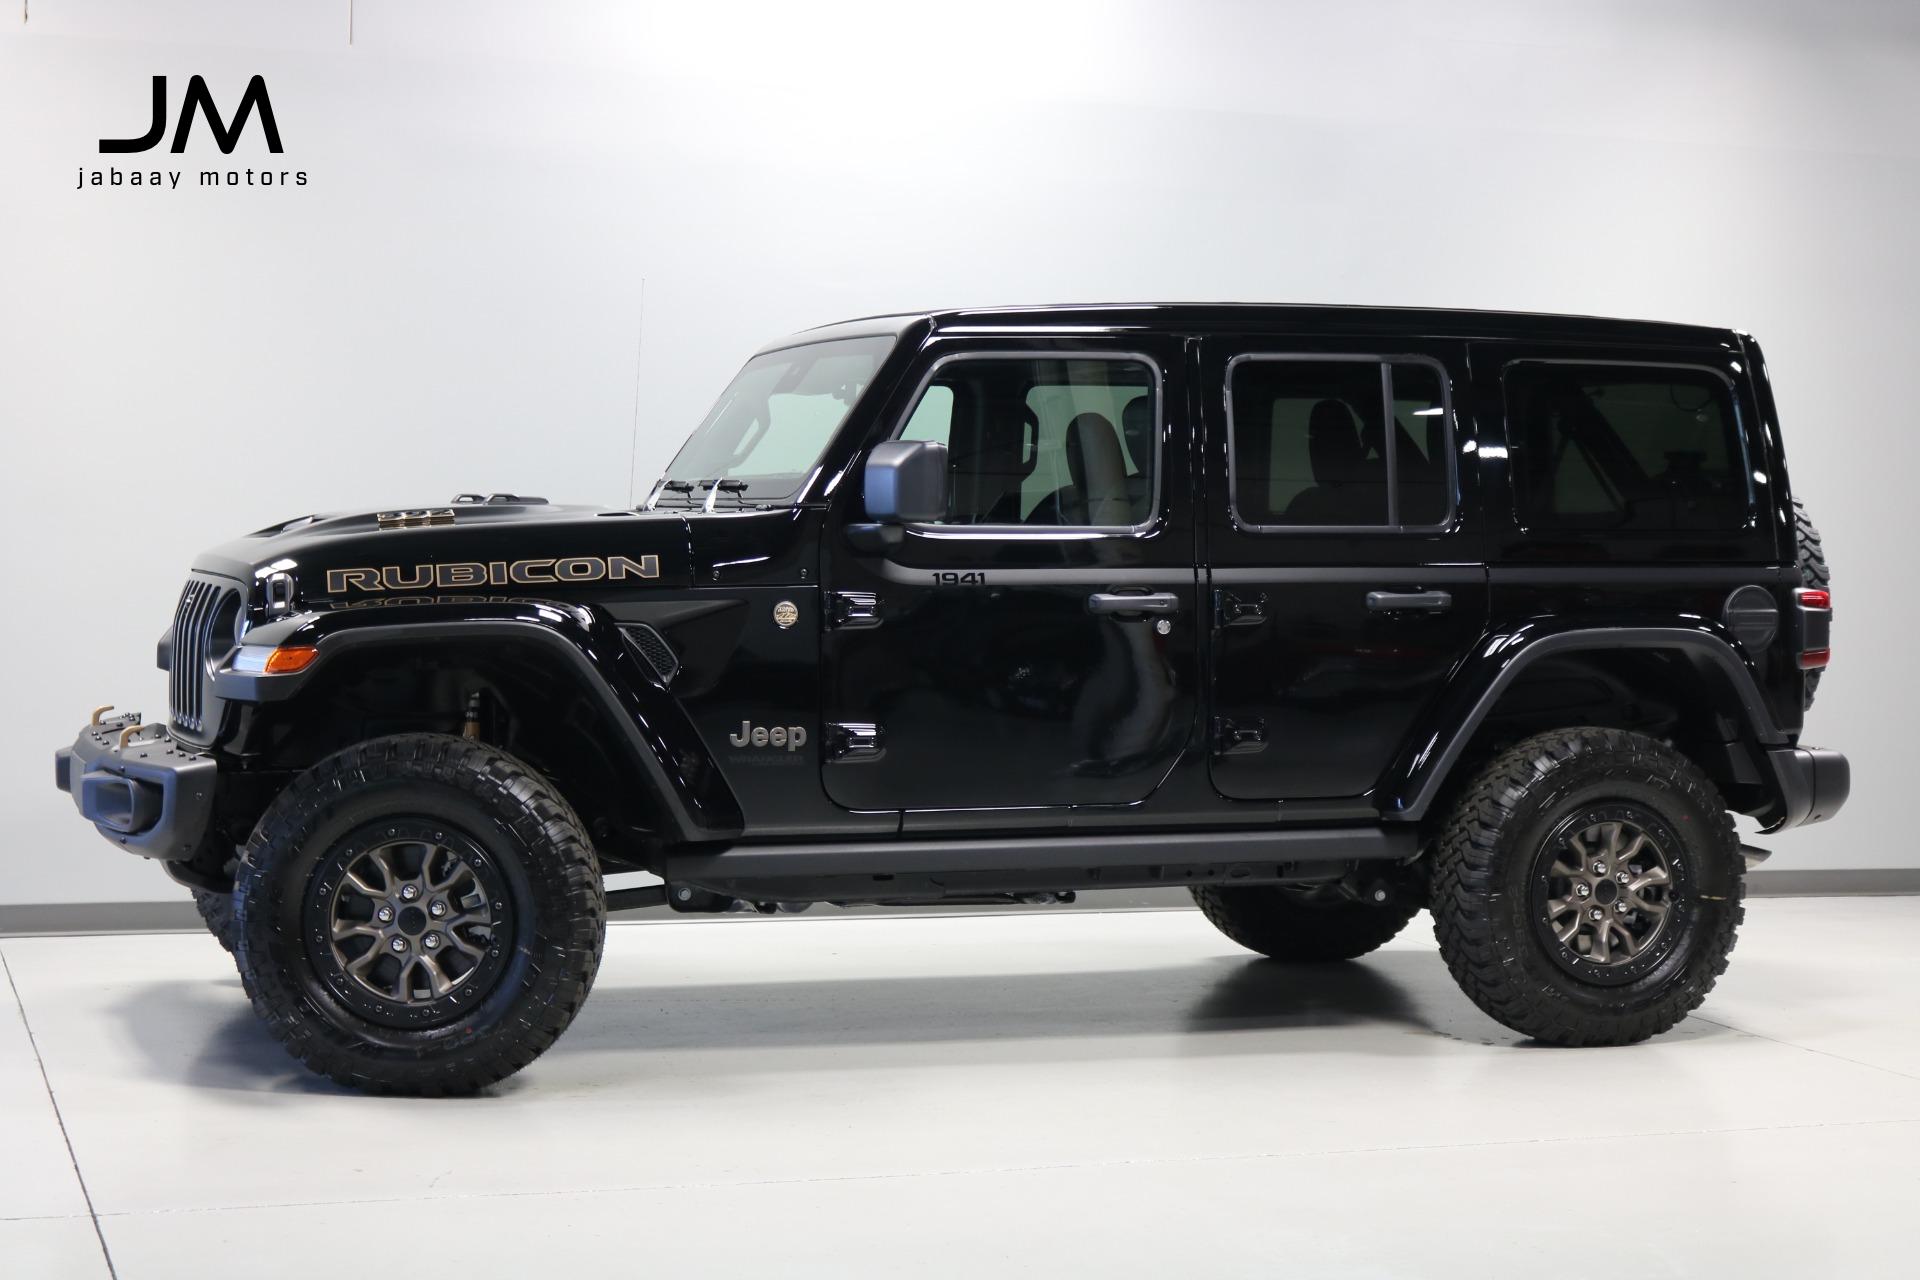 Used 2021 Jeep Wrangler Unlimited Rubicon 392 For Sale Sold Jabaay Motors Inc Stock Jm7738